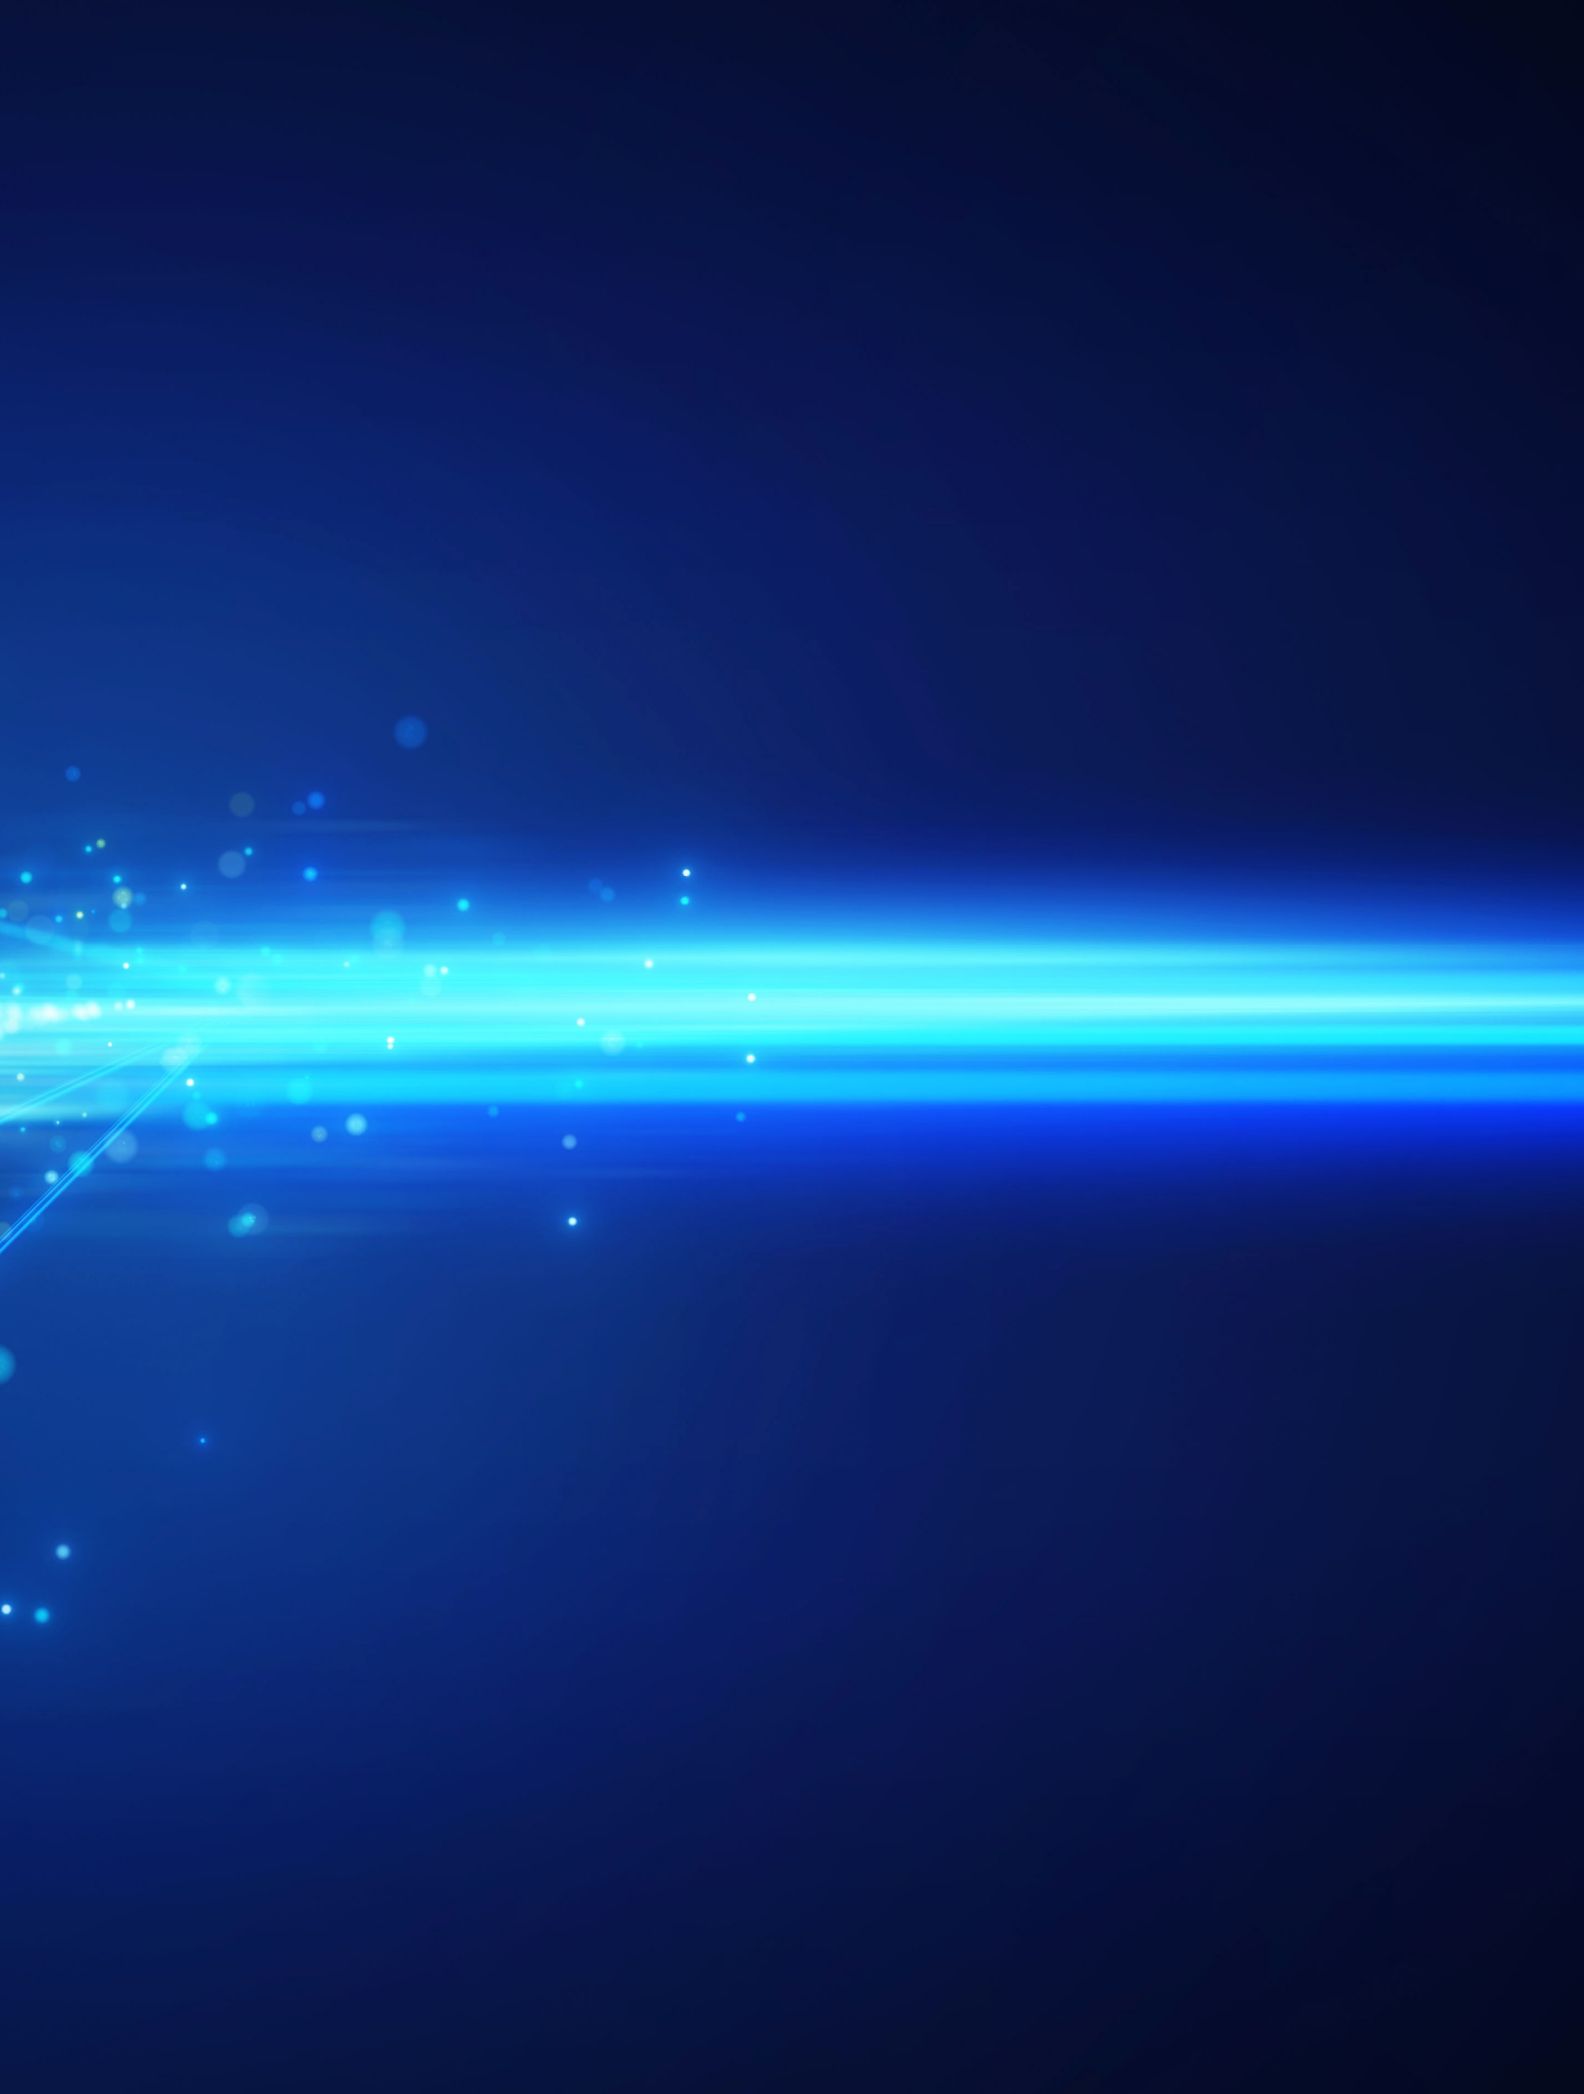 Light beam of particles against a blue background